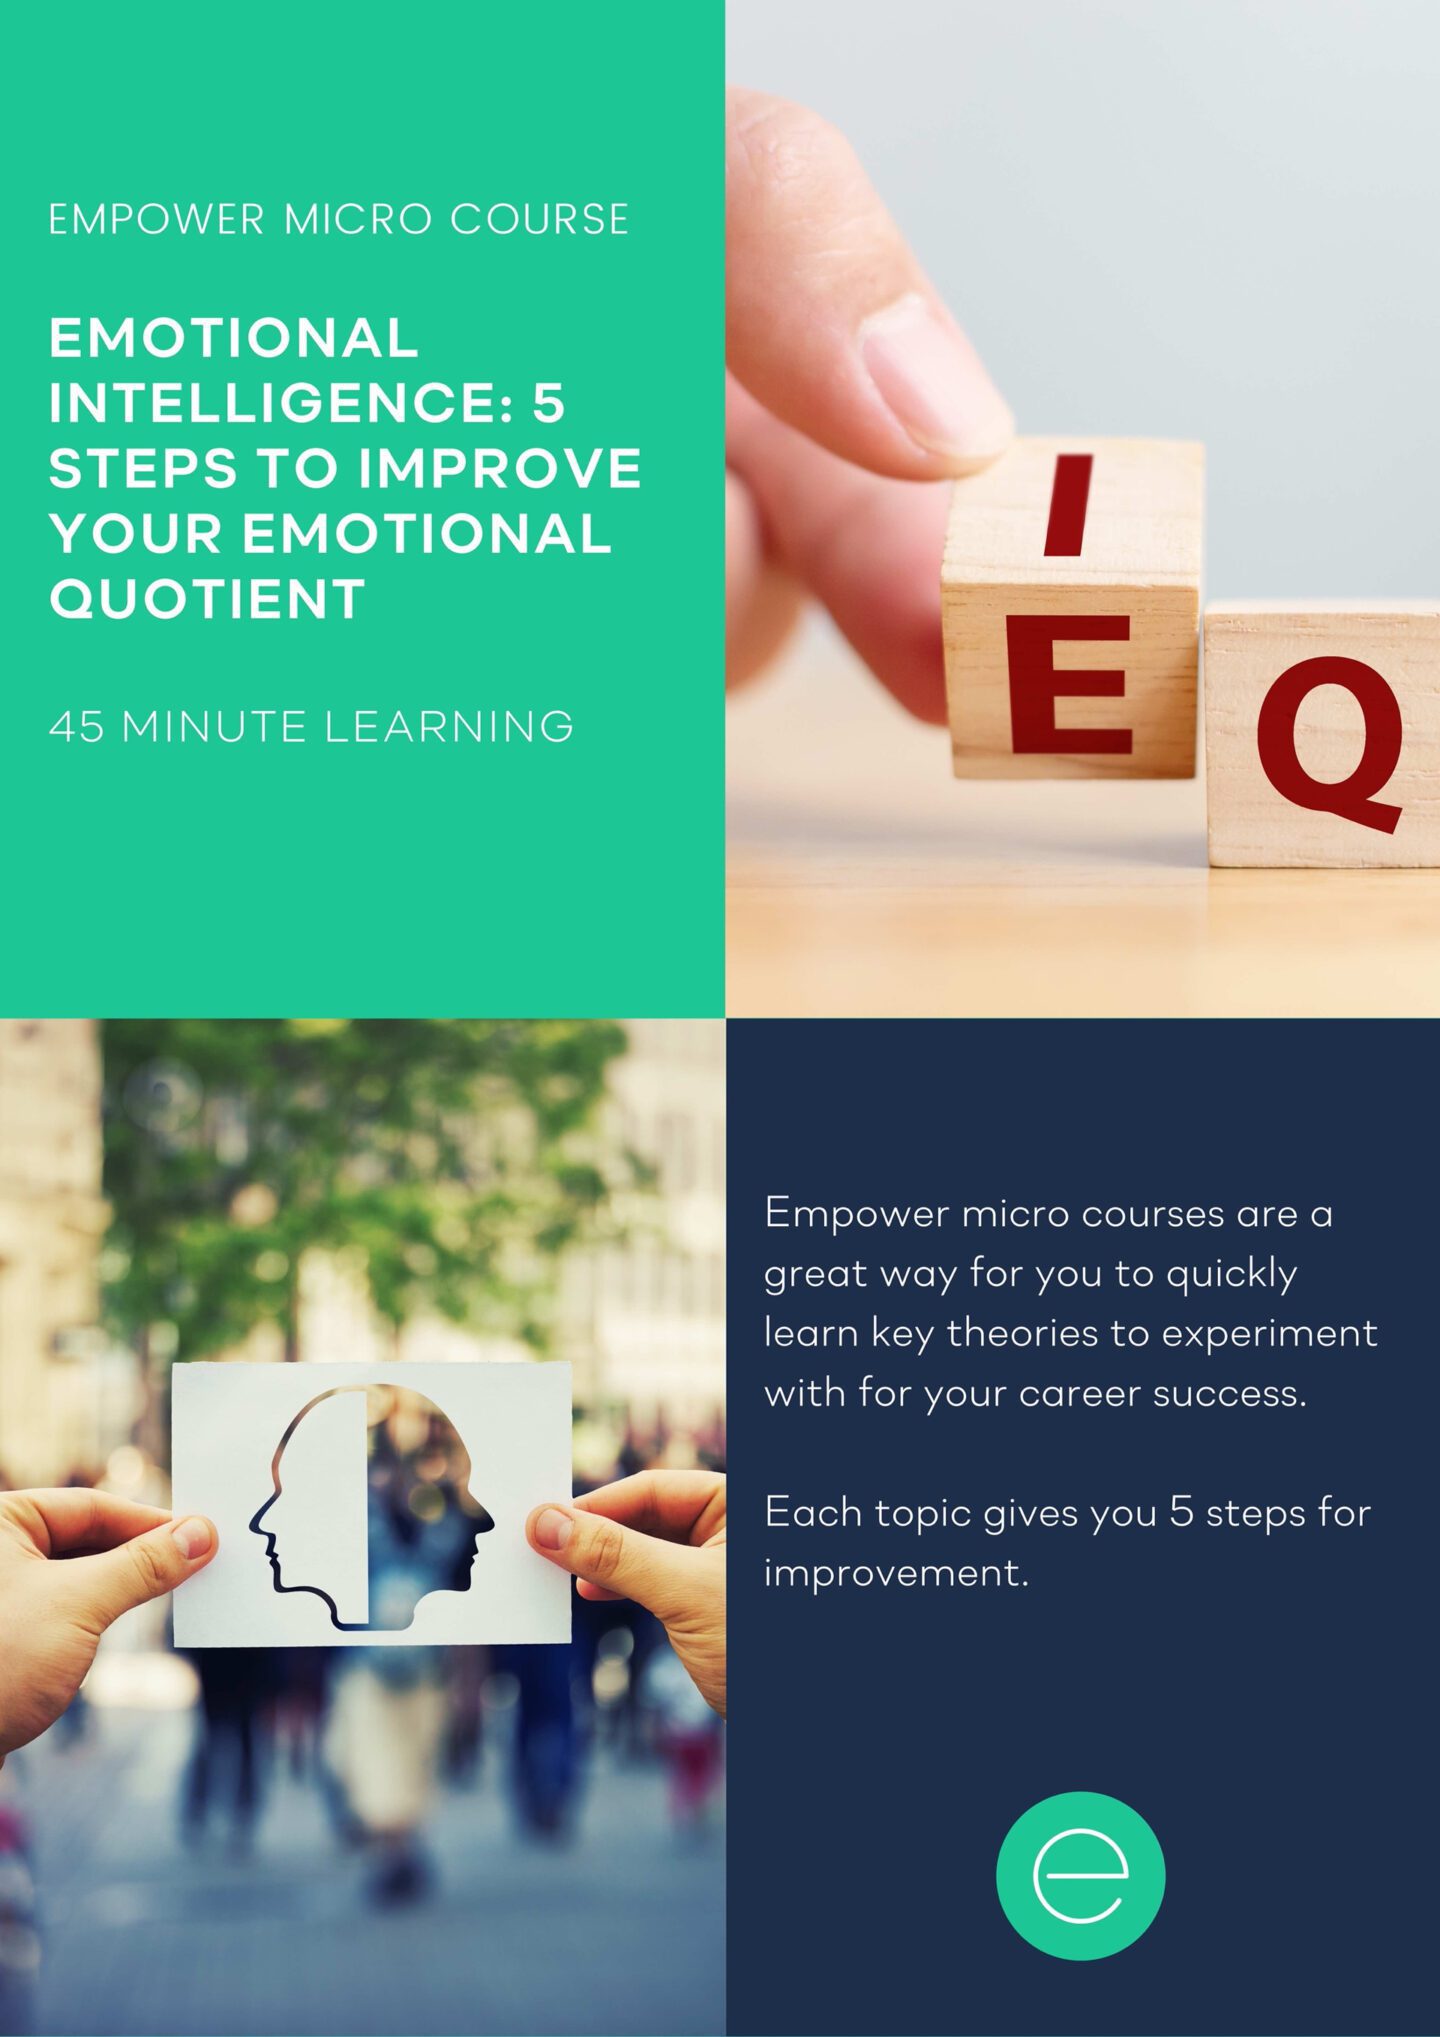 5 Steps to Improve Your Emotional Quotient